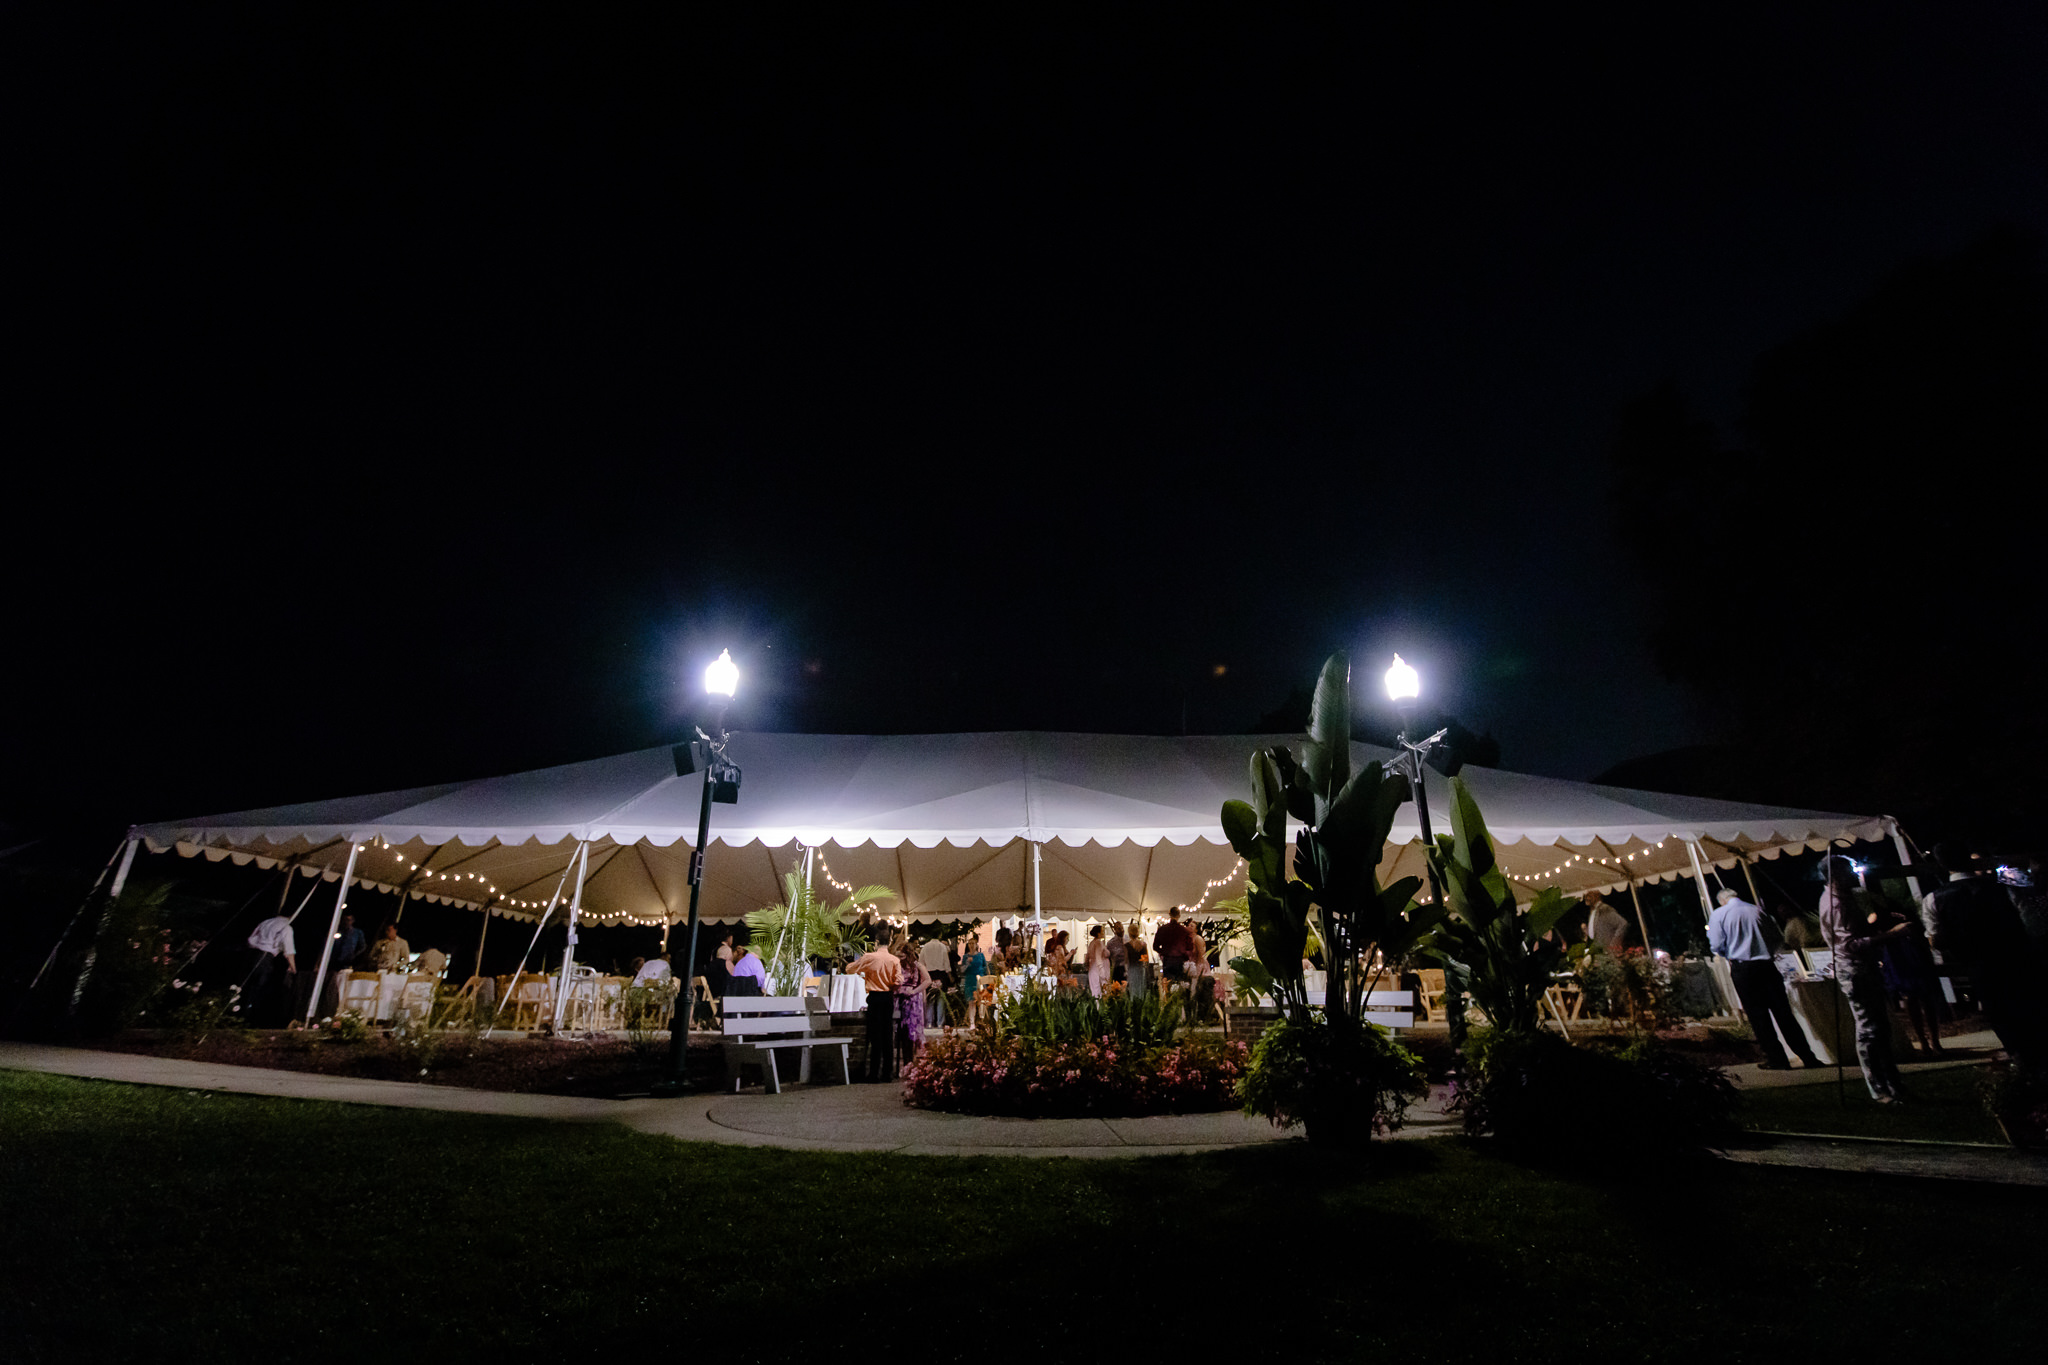 Outdoor tented wedding reception at night at the National Aviary in Pittsburgh, PA